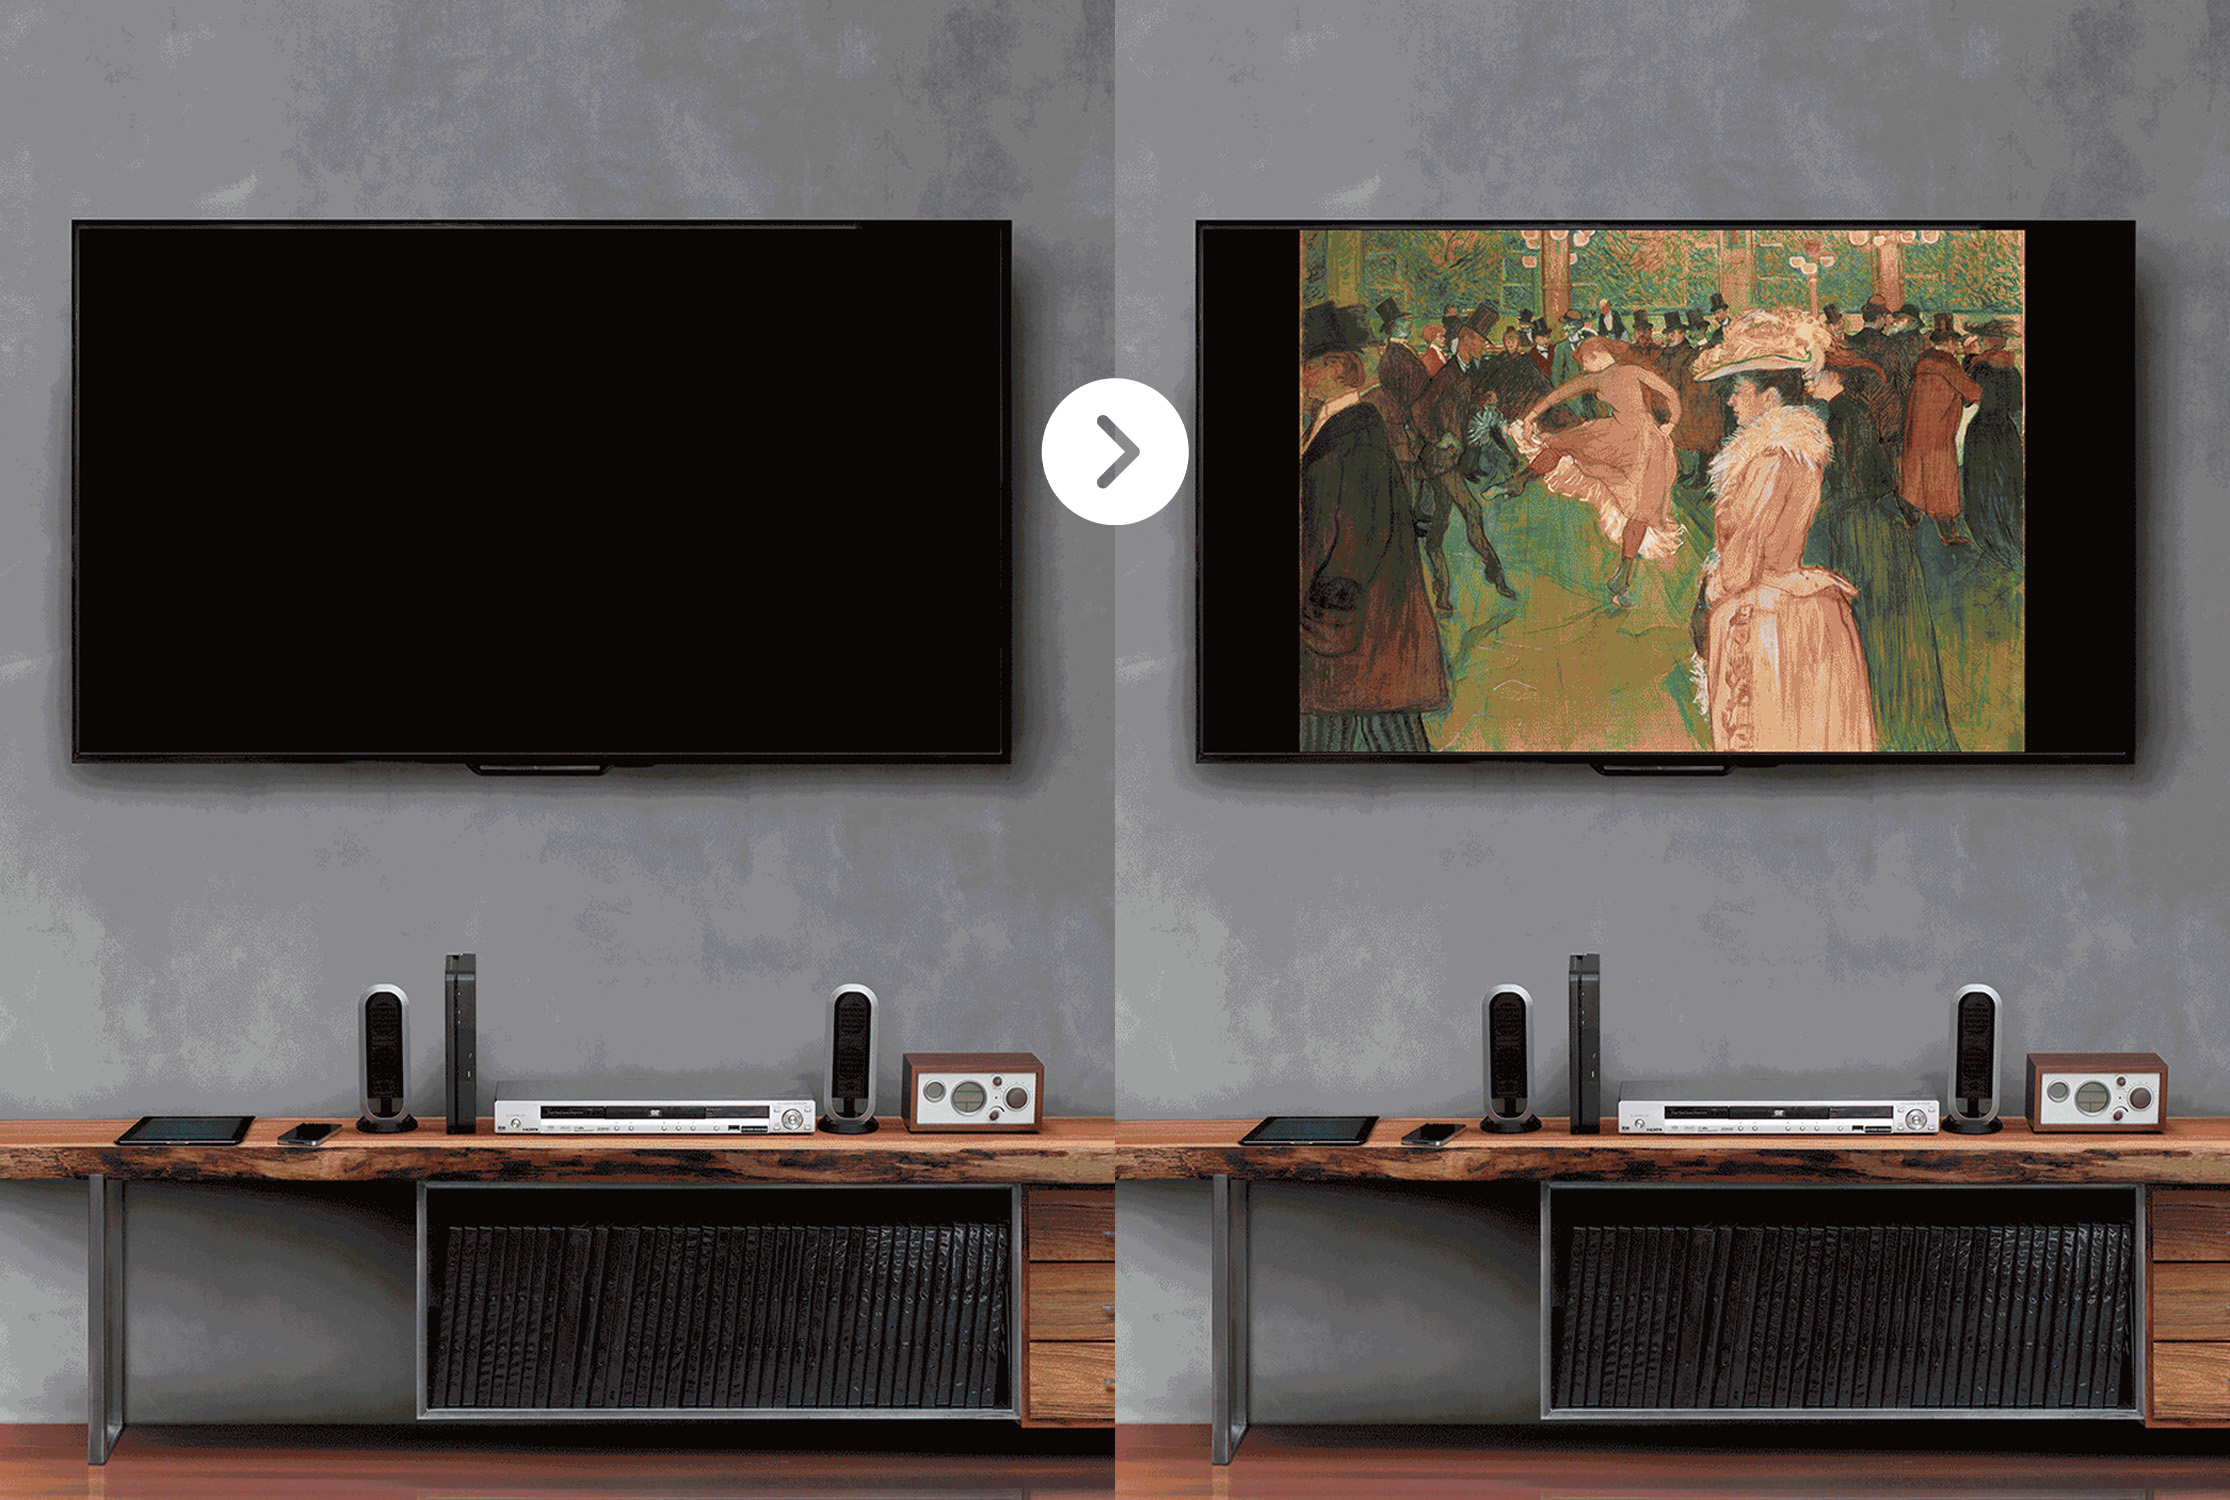 Presidents’ Day sale! Get Dreamscreens for $33 and turn your TV into an art museum with 500+ famous paintings